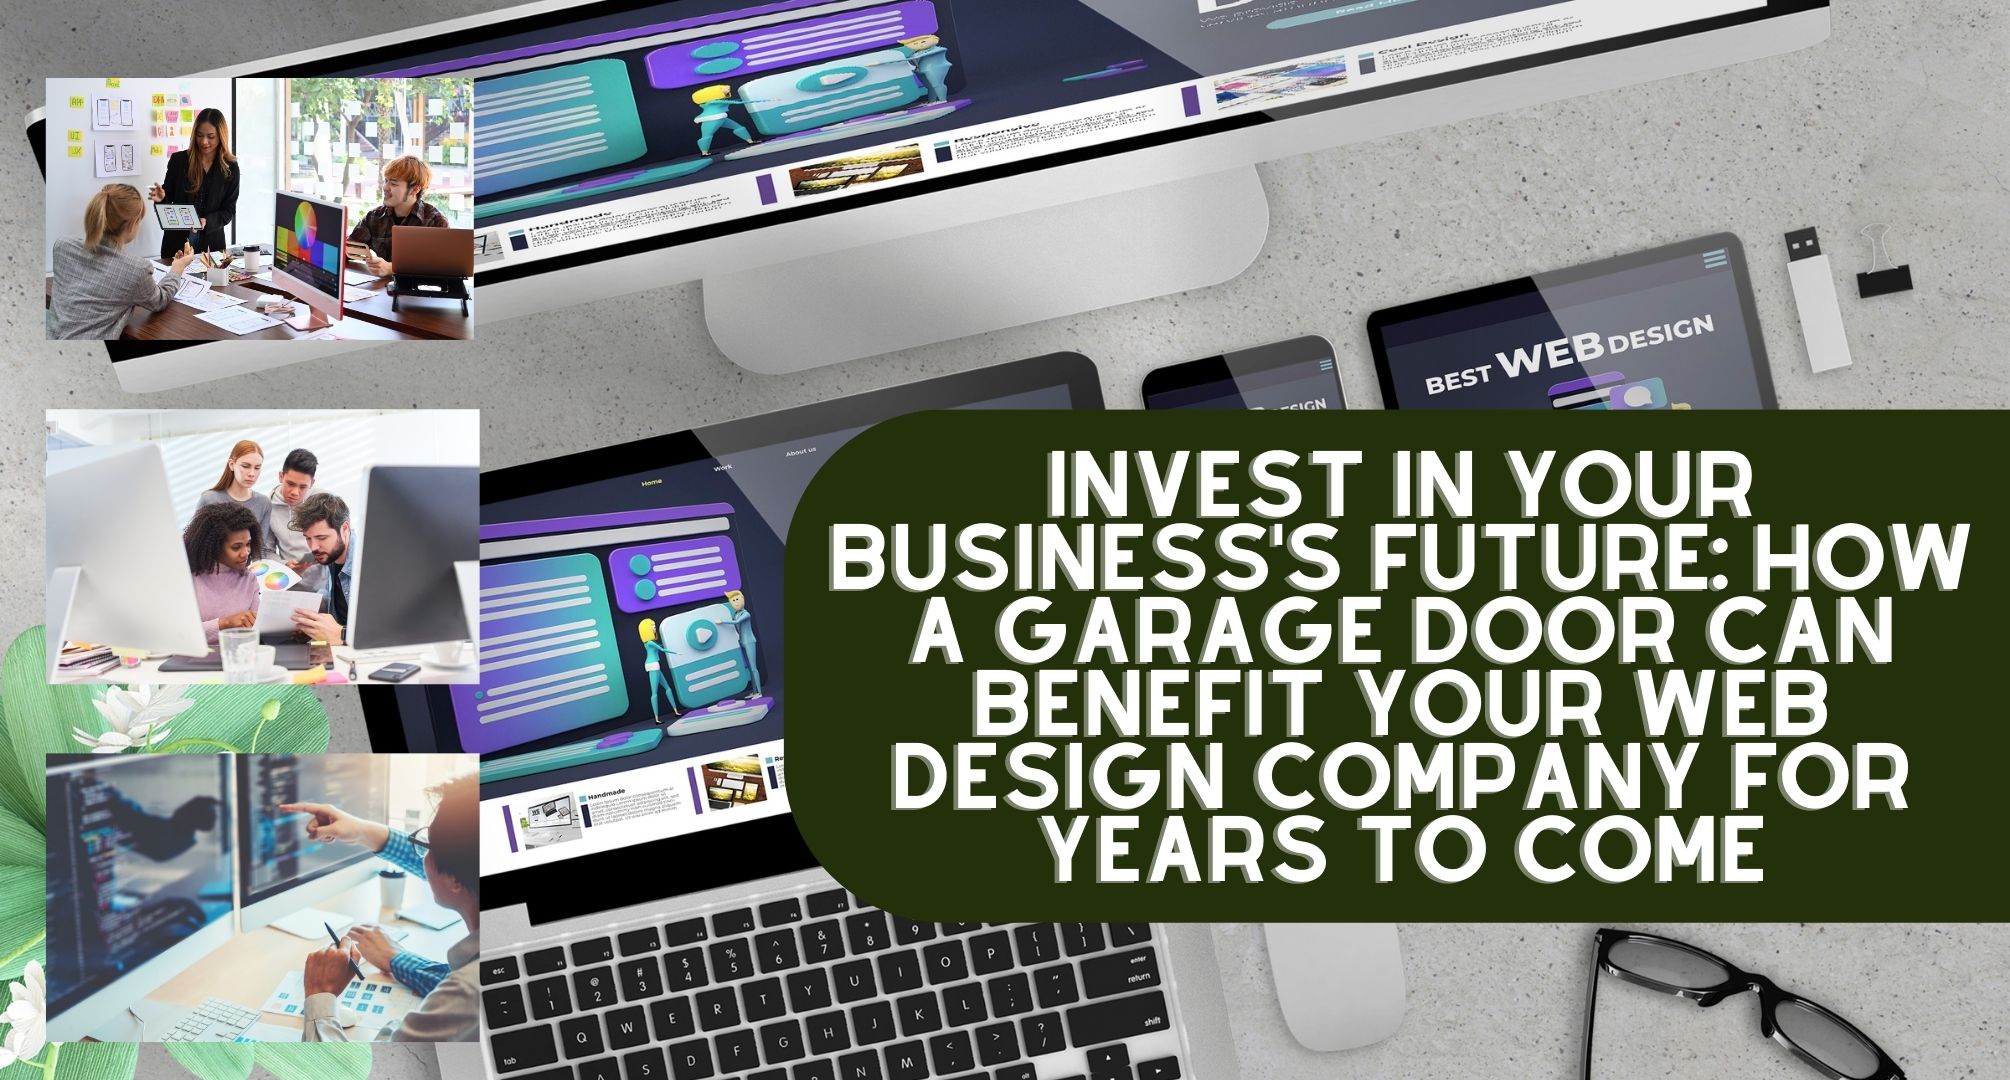 Invest in Your Business's Future How a Garage Door Can Benefit Your Web Design Company for Years to Come